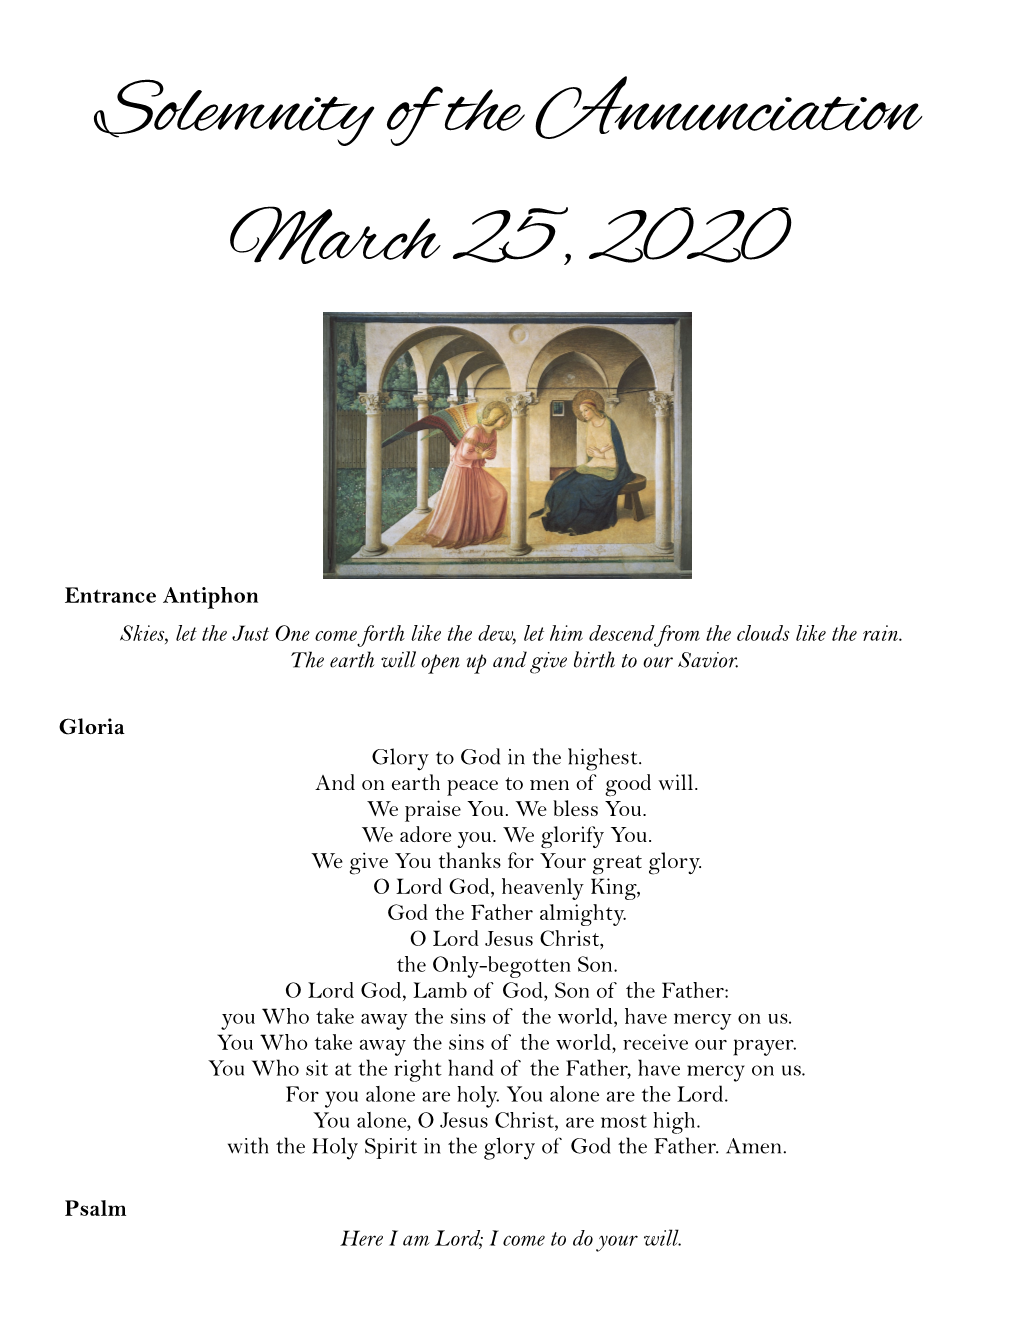 Solemnity of the Annunciation March 25, 2020